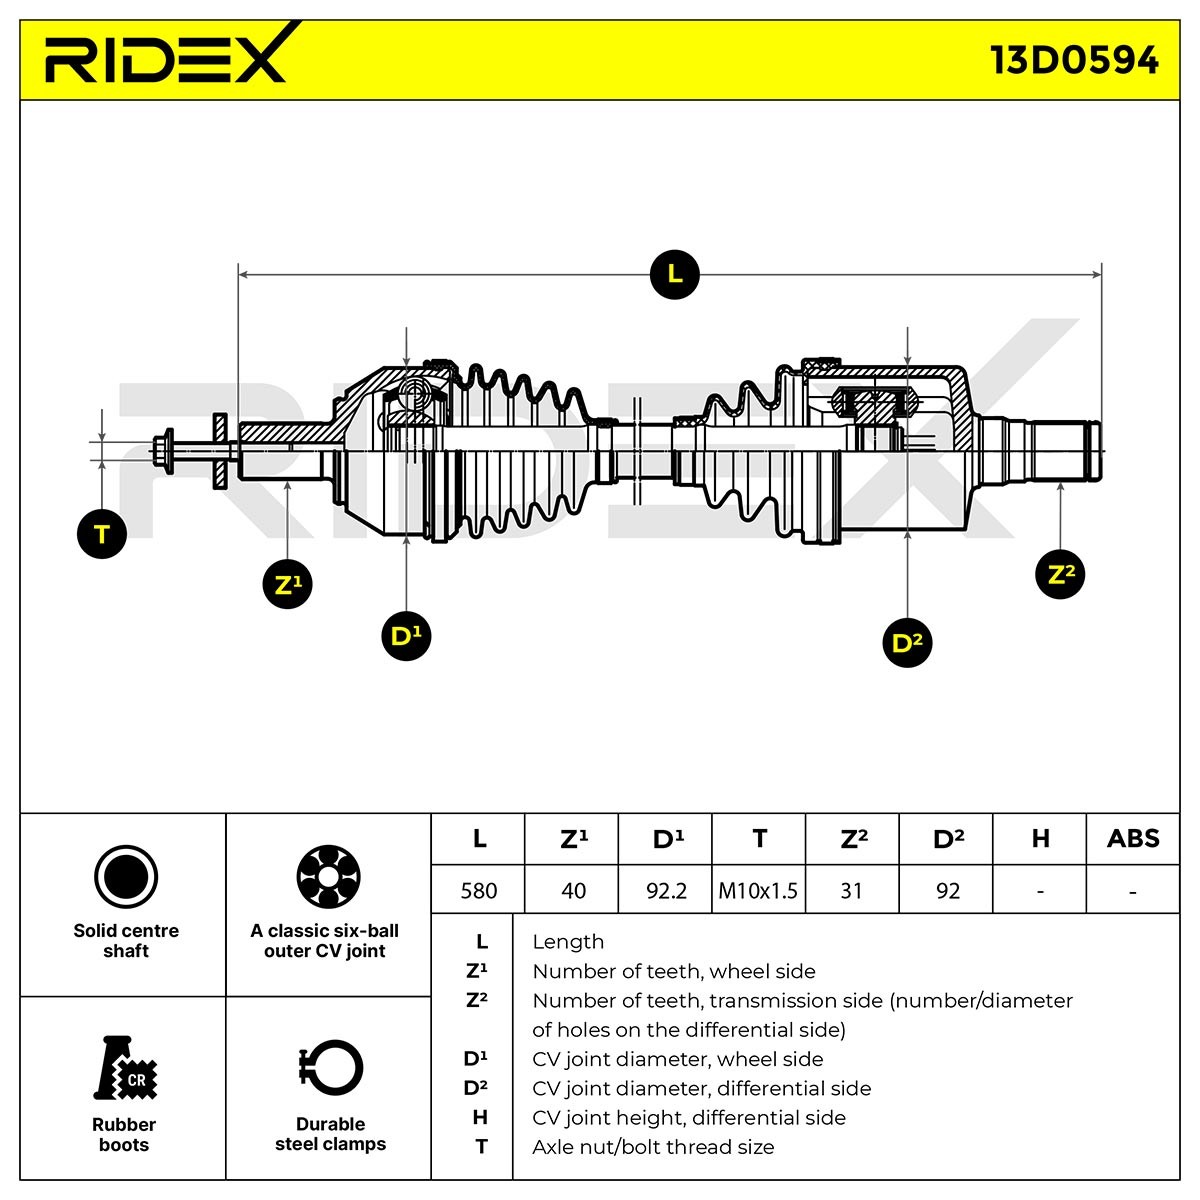 Drive shaft 13D0594 from RIDEX